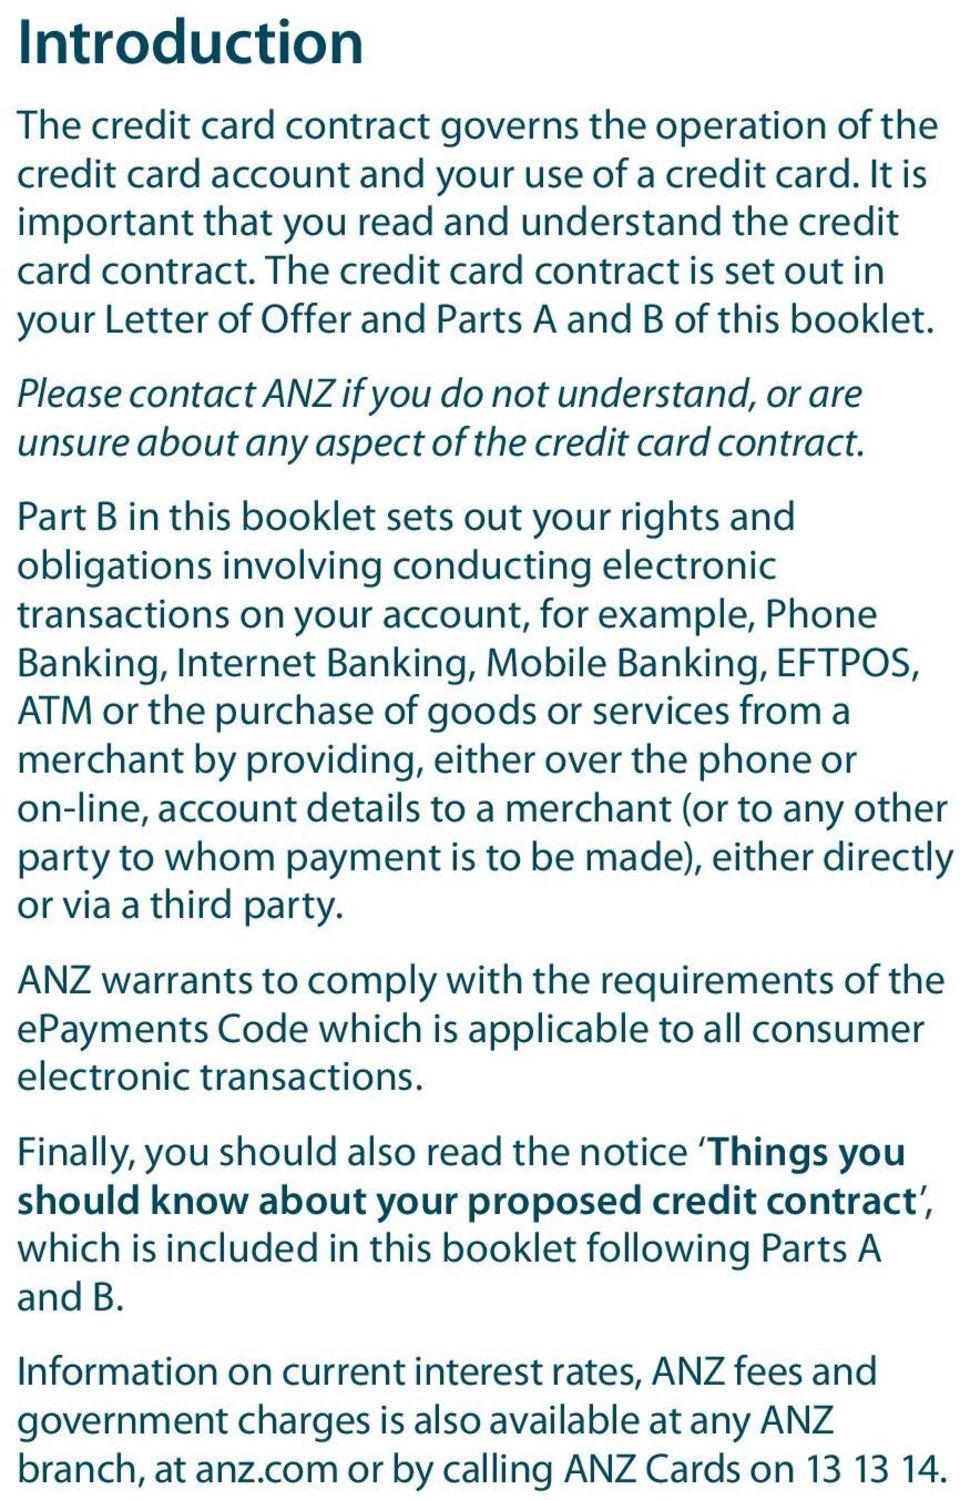 Part B in this booklet sets out your rights and obligations involving conducting electronic transactions on your account, for example, Phone Banking, Internet Banking, Mobile Banking, EFTPOS, ATM or